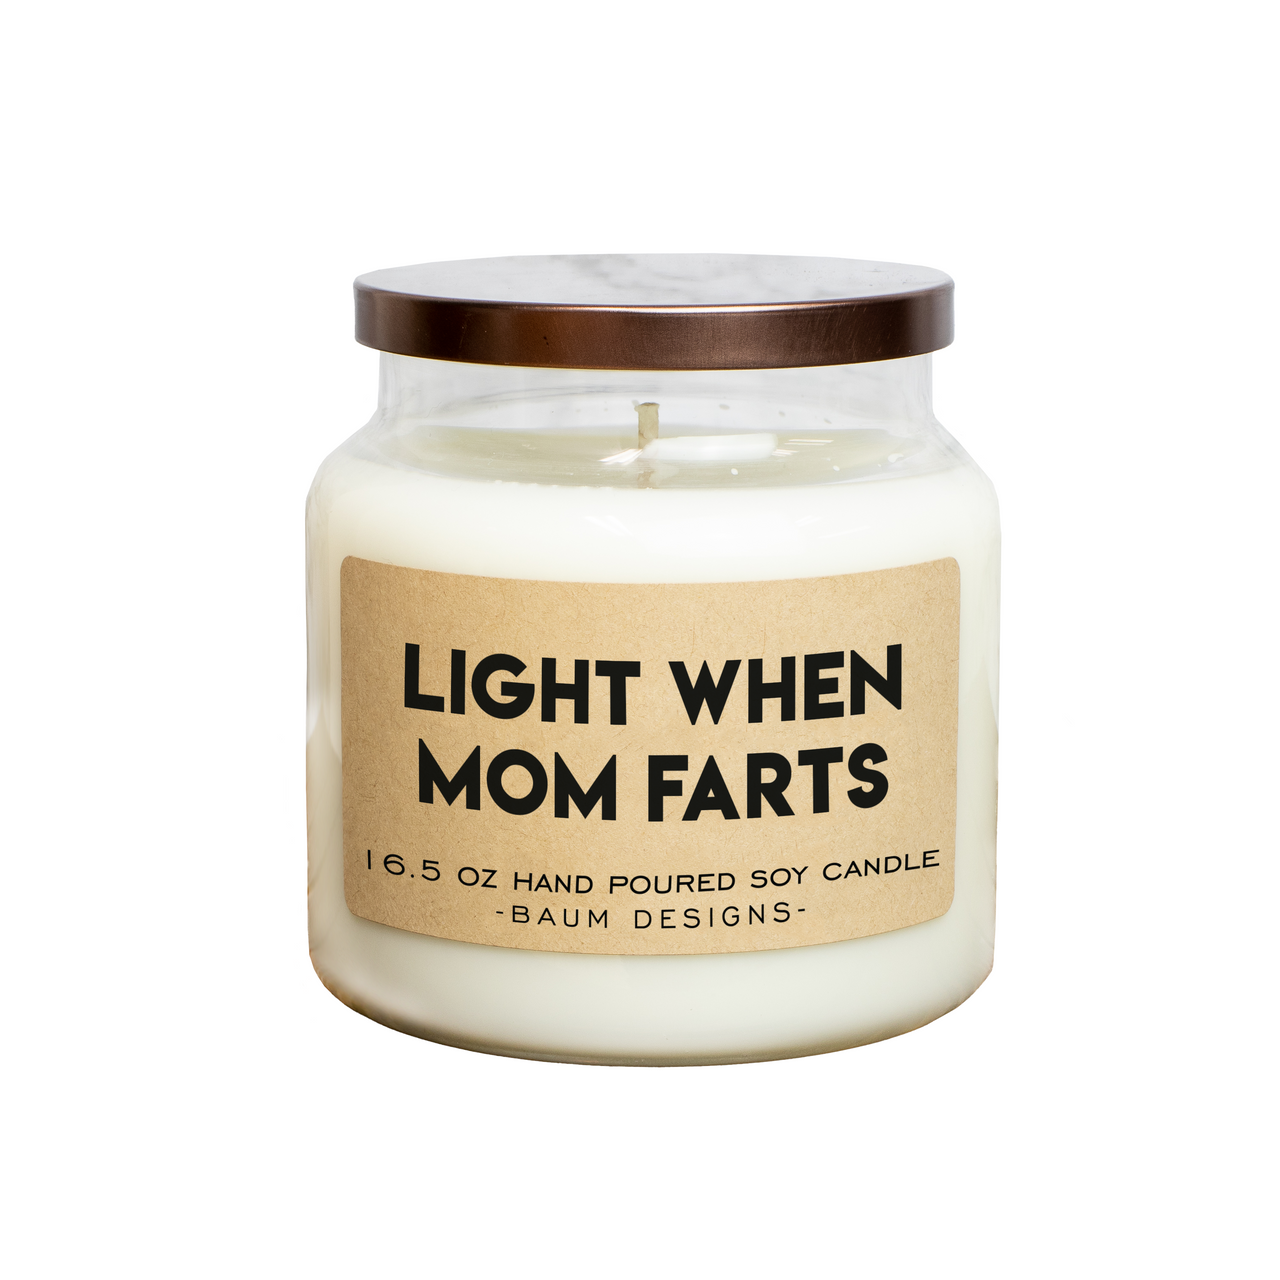 Light When Mom Farts Soy Candle